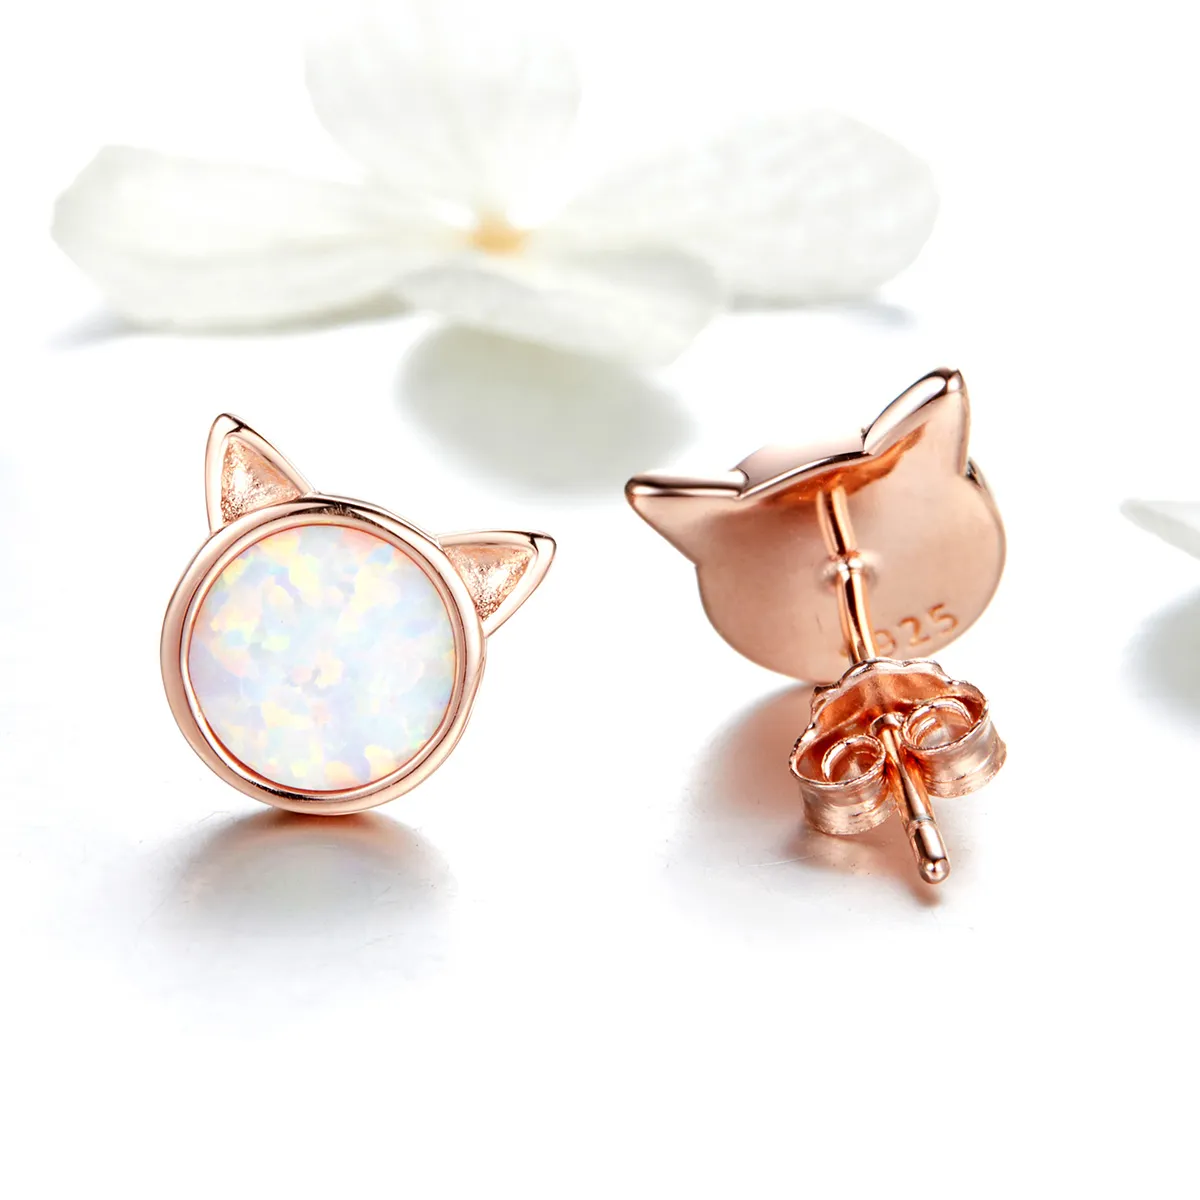 Pandora Style Rose Gold Meow Star Stud Earrings - SCE538